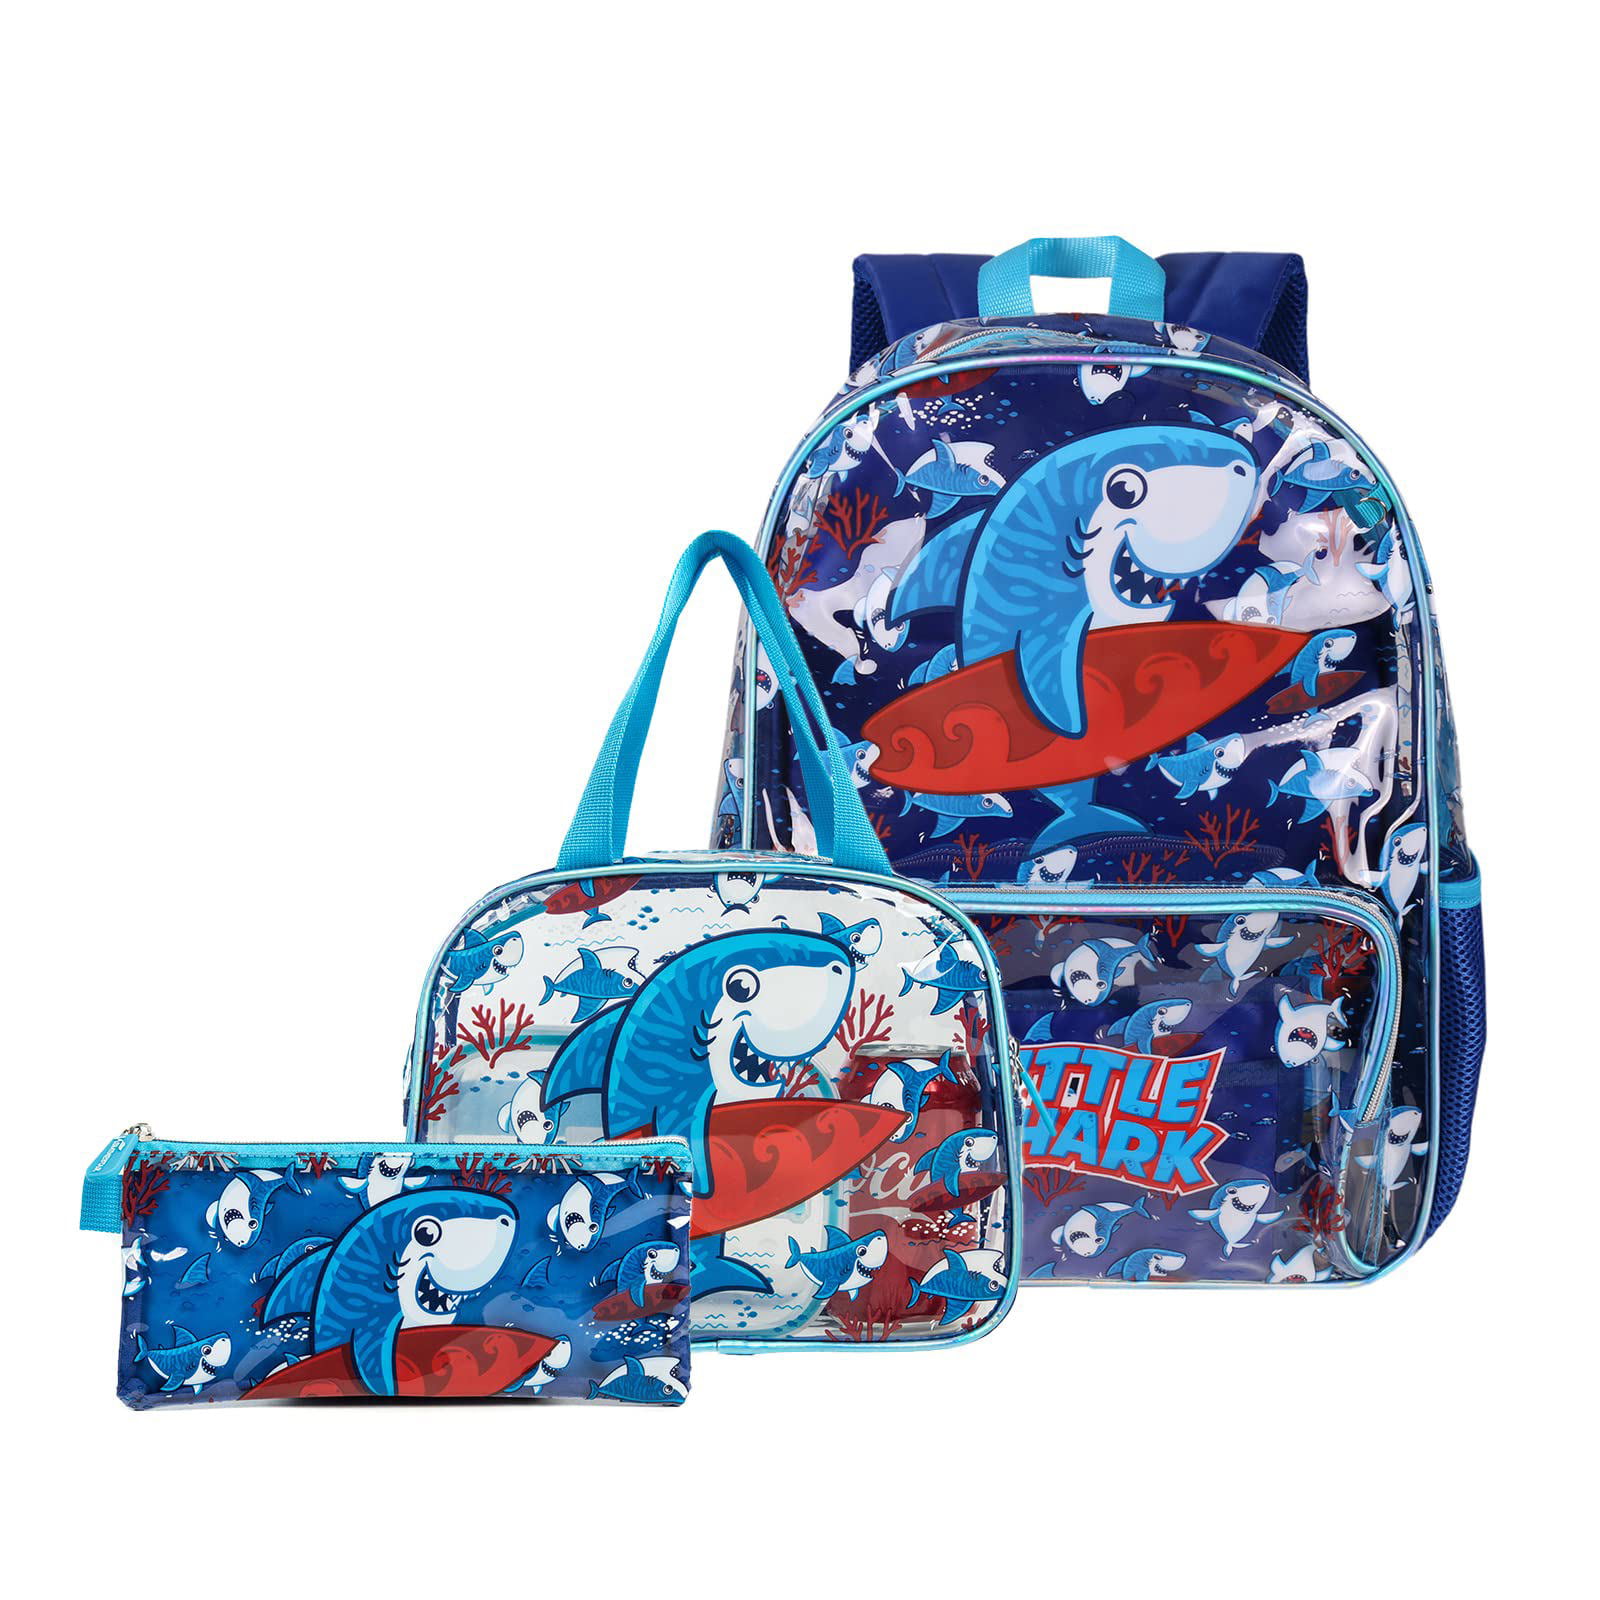 Lilo Stitch School Bags Pencil Bag Unisex College Backpack